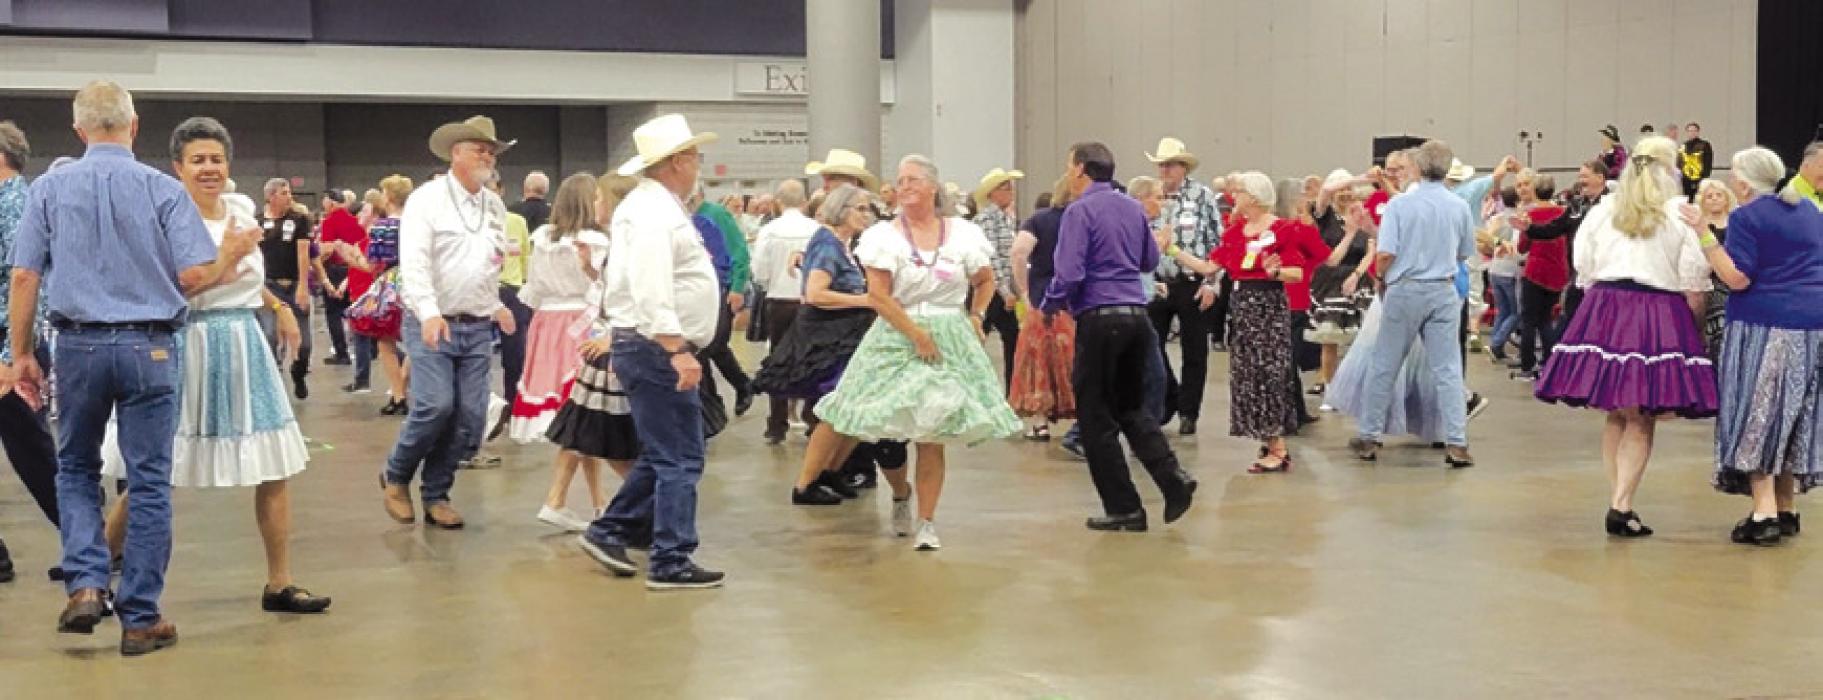 LG Square Dancers Attend Convention in Alabama